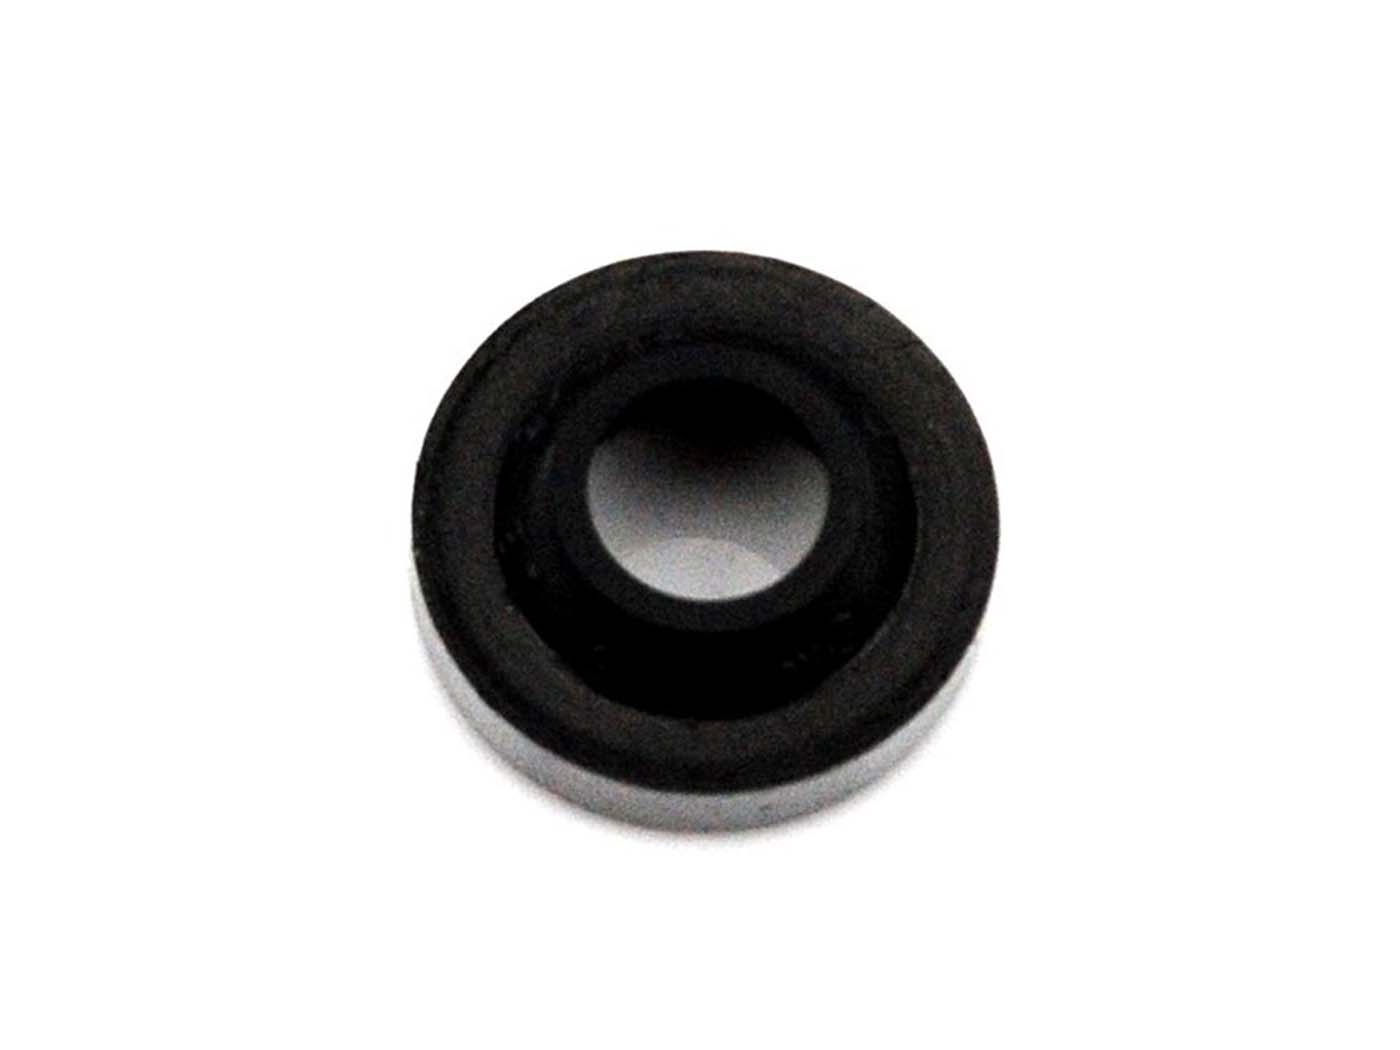 Oil Seal MOGA Dimensions 6 X 13 3 4.5mm For NSU Quickly L, N, N23, S, S23